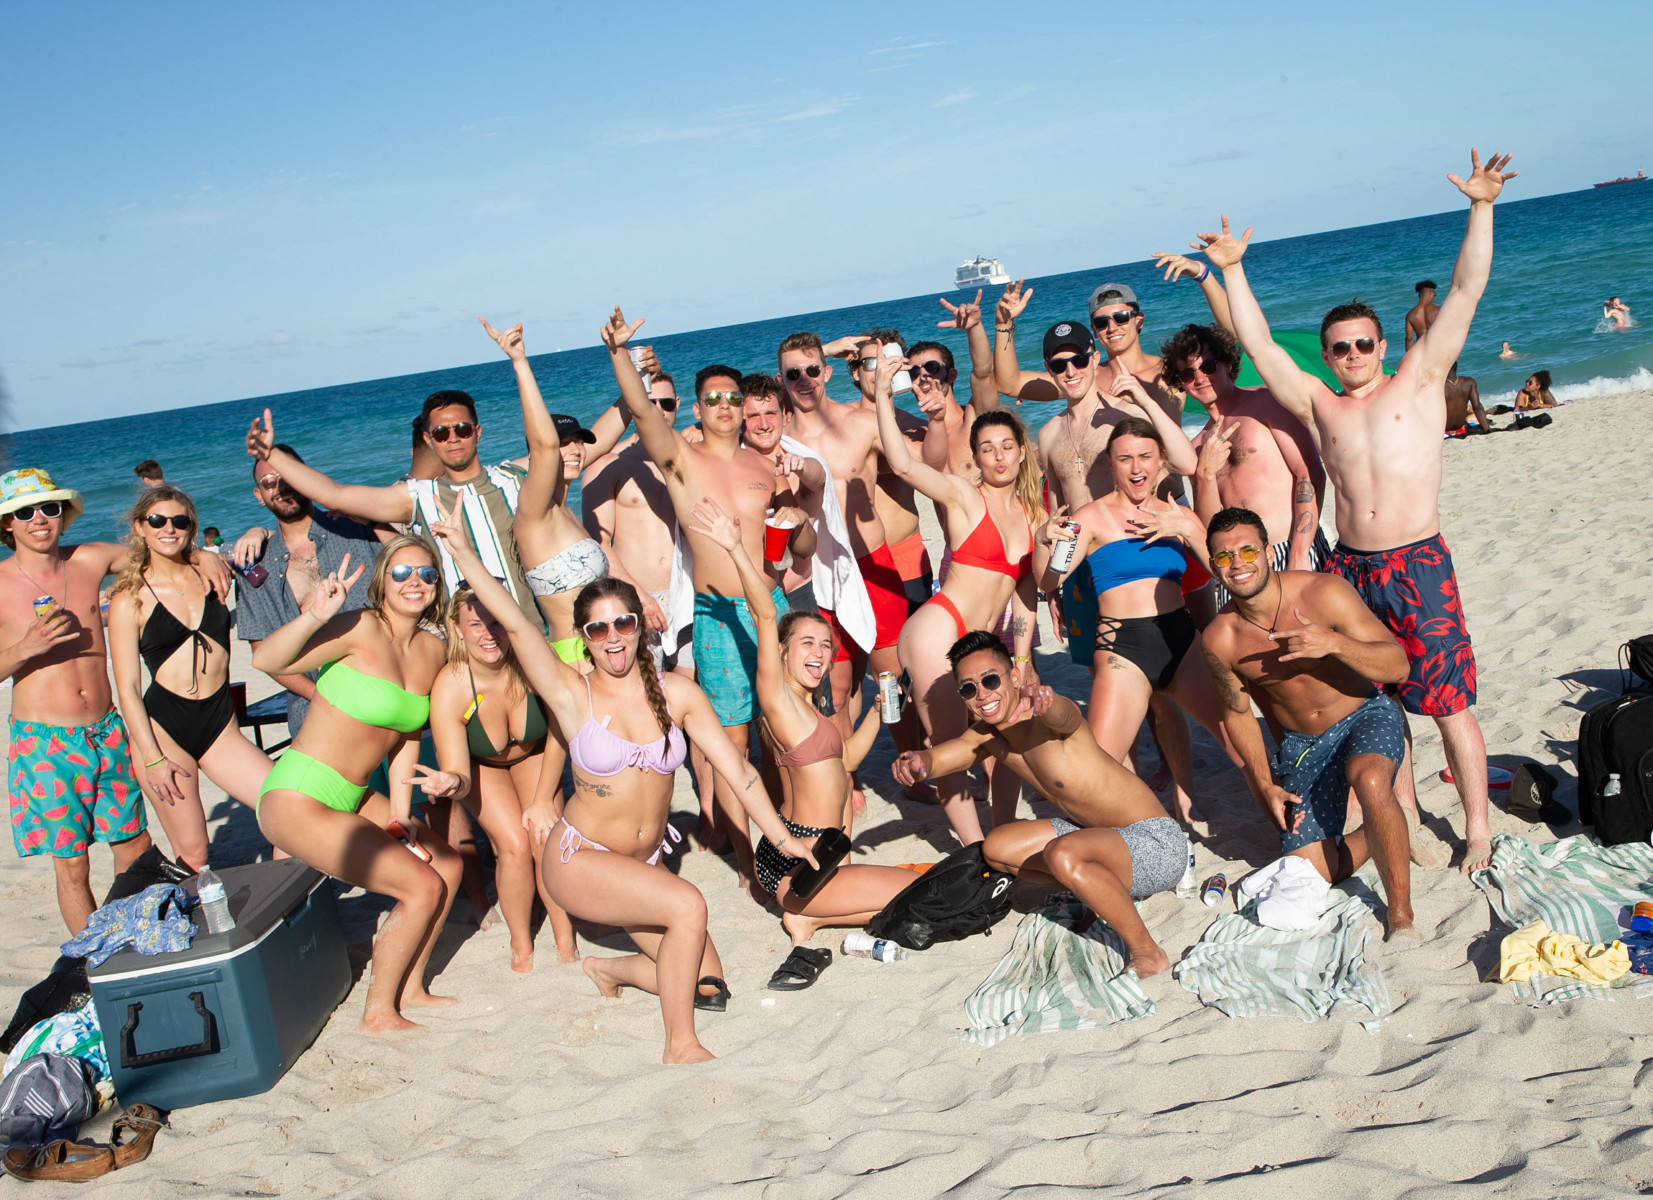 Many spring breakers have ignored pleas from officials to practice social distancing